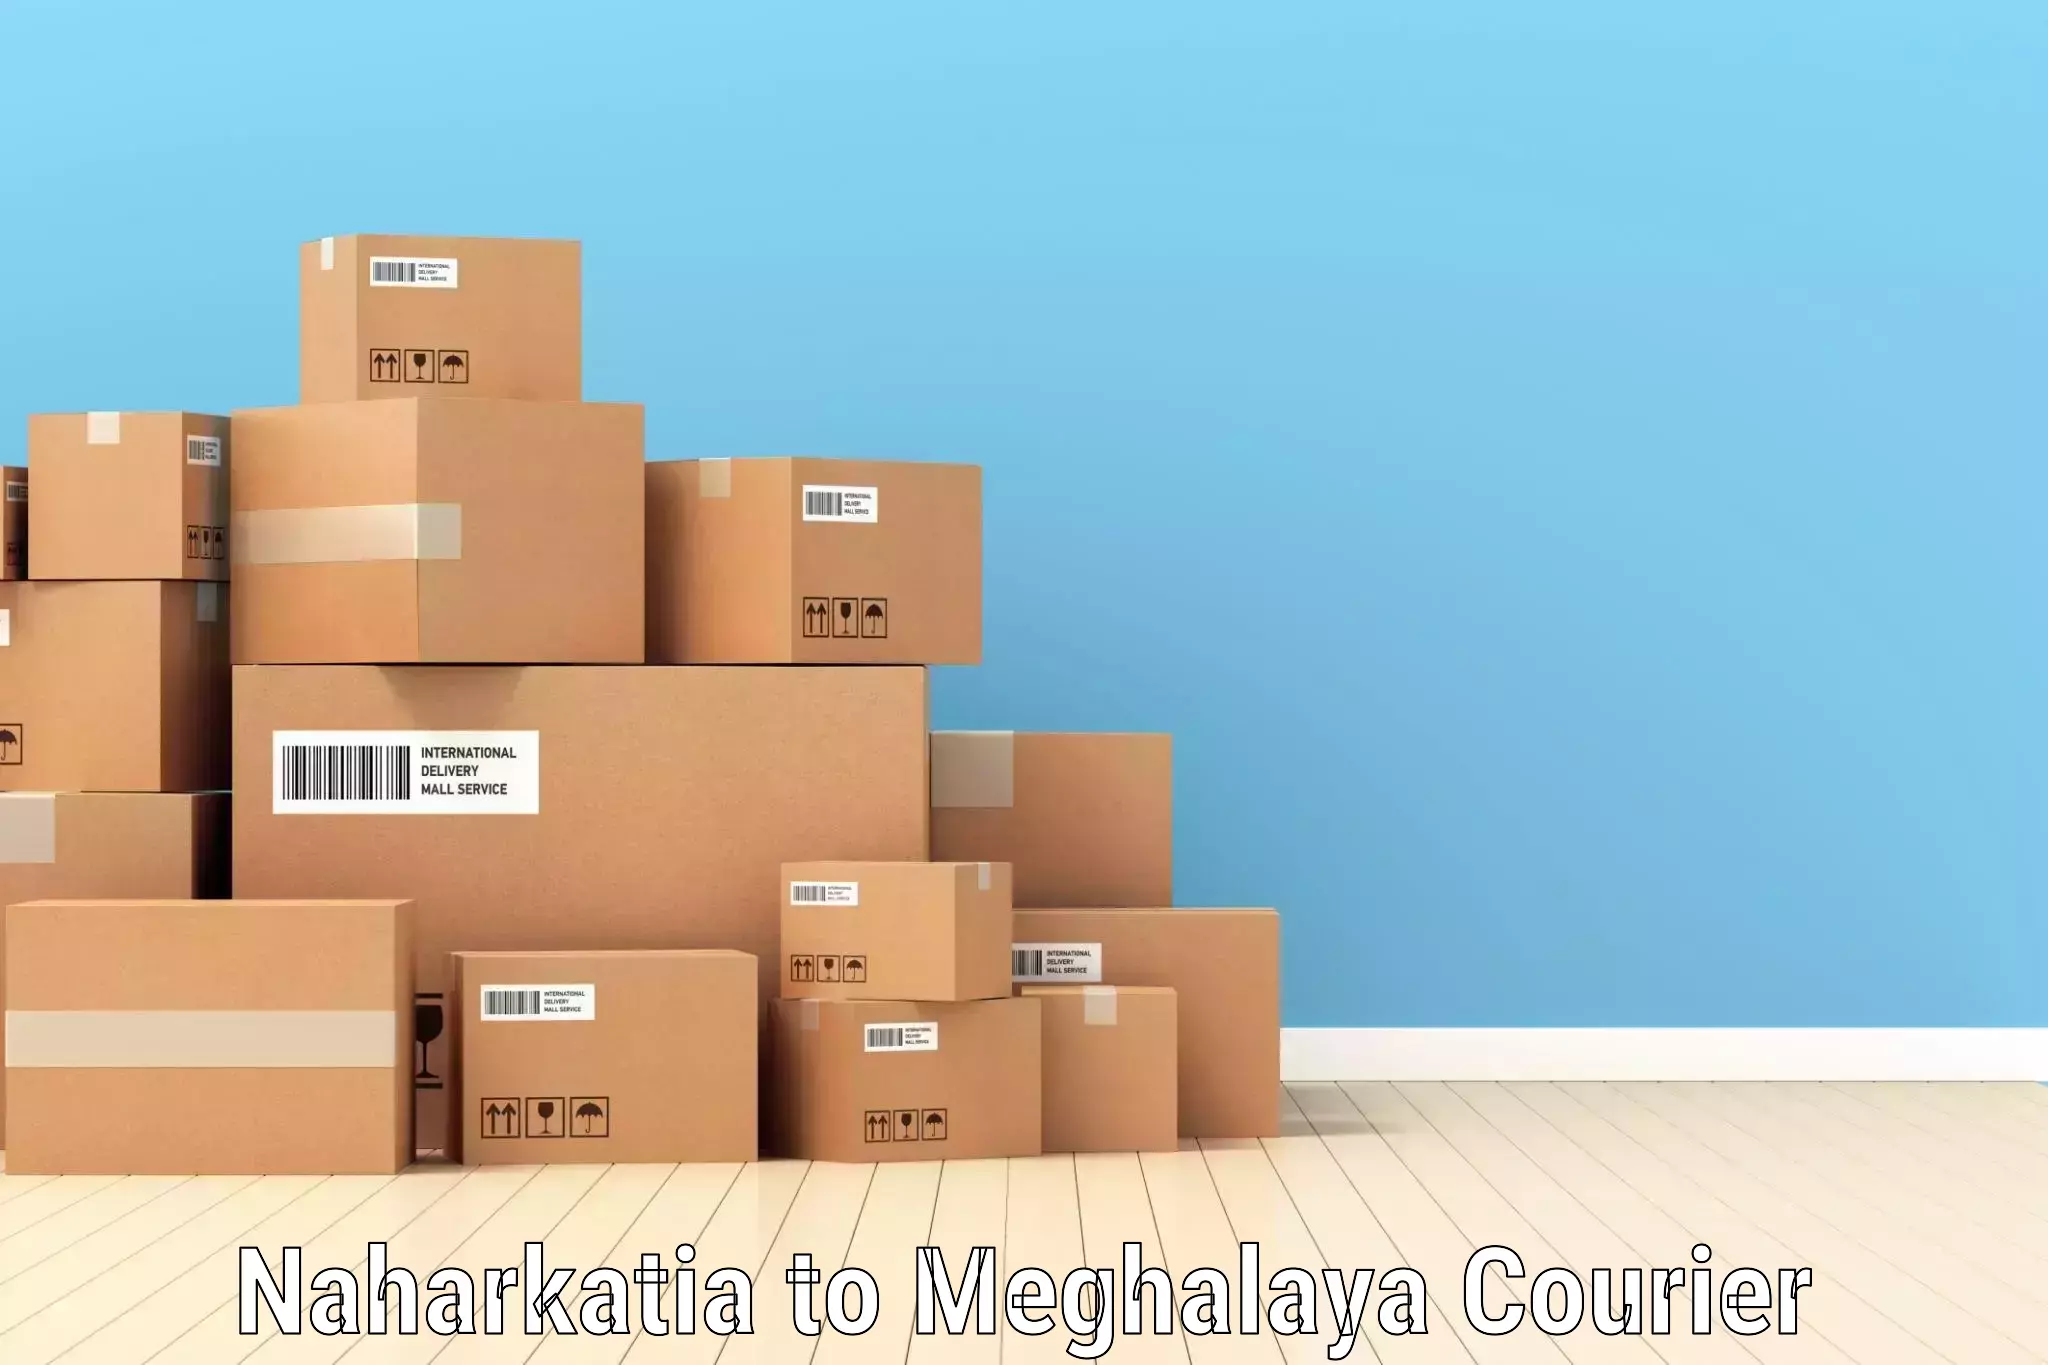 Package delivery network Naharkatia to Meghalaya